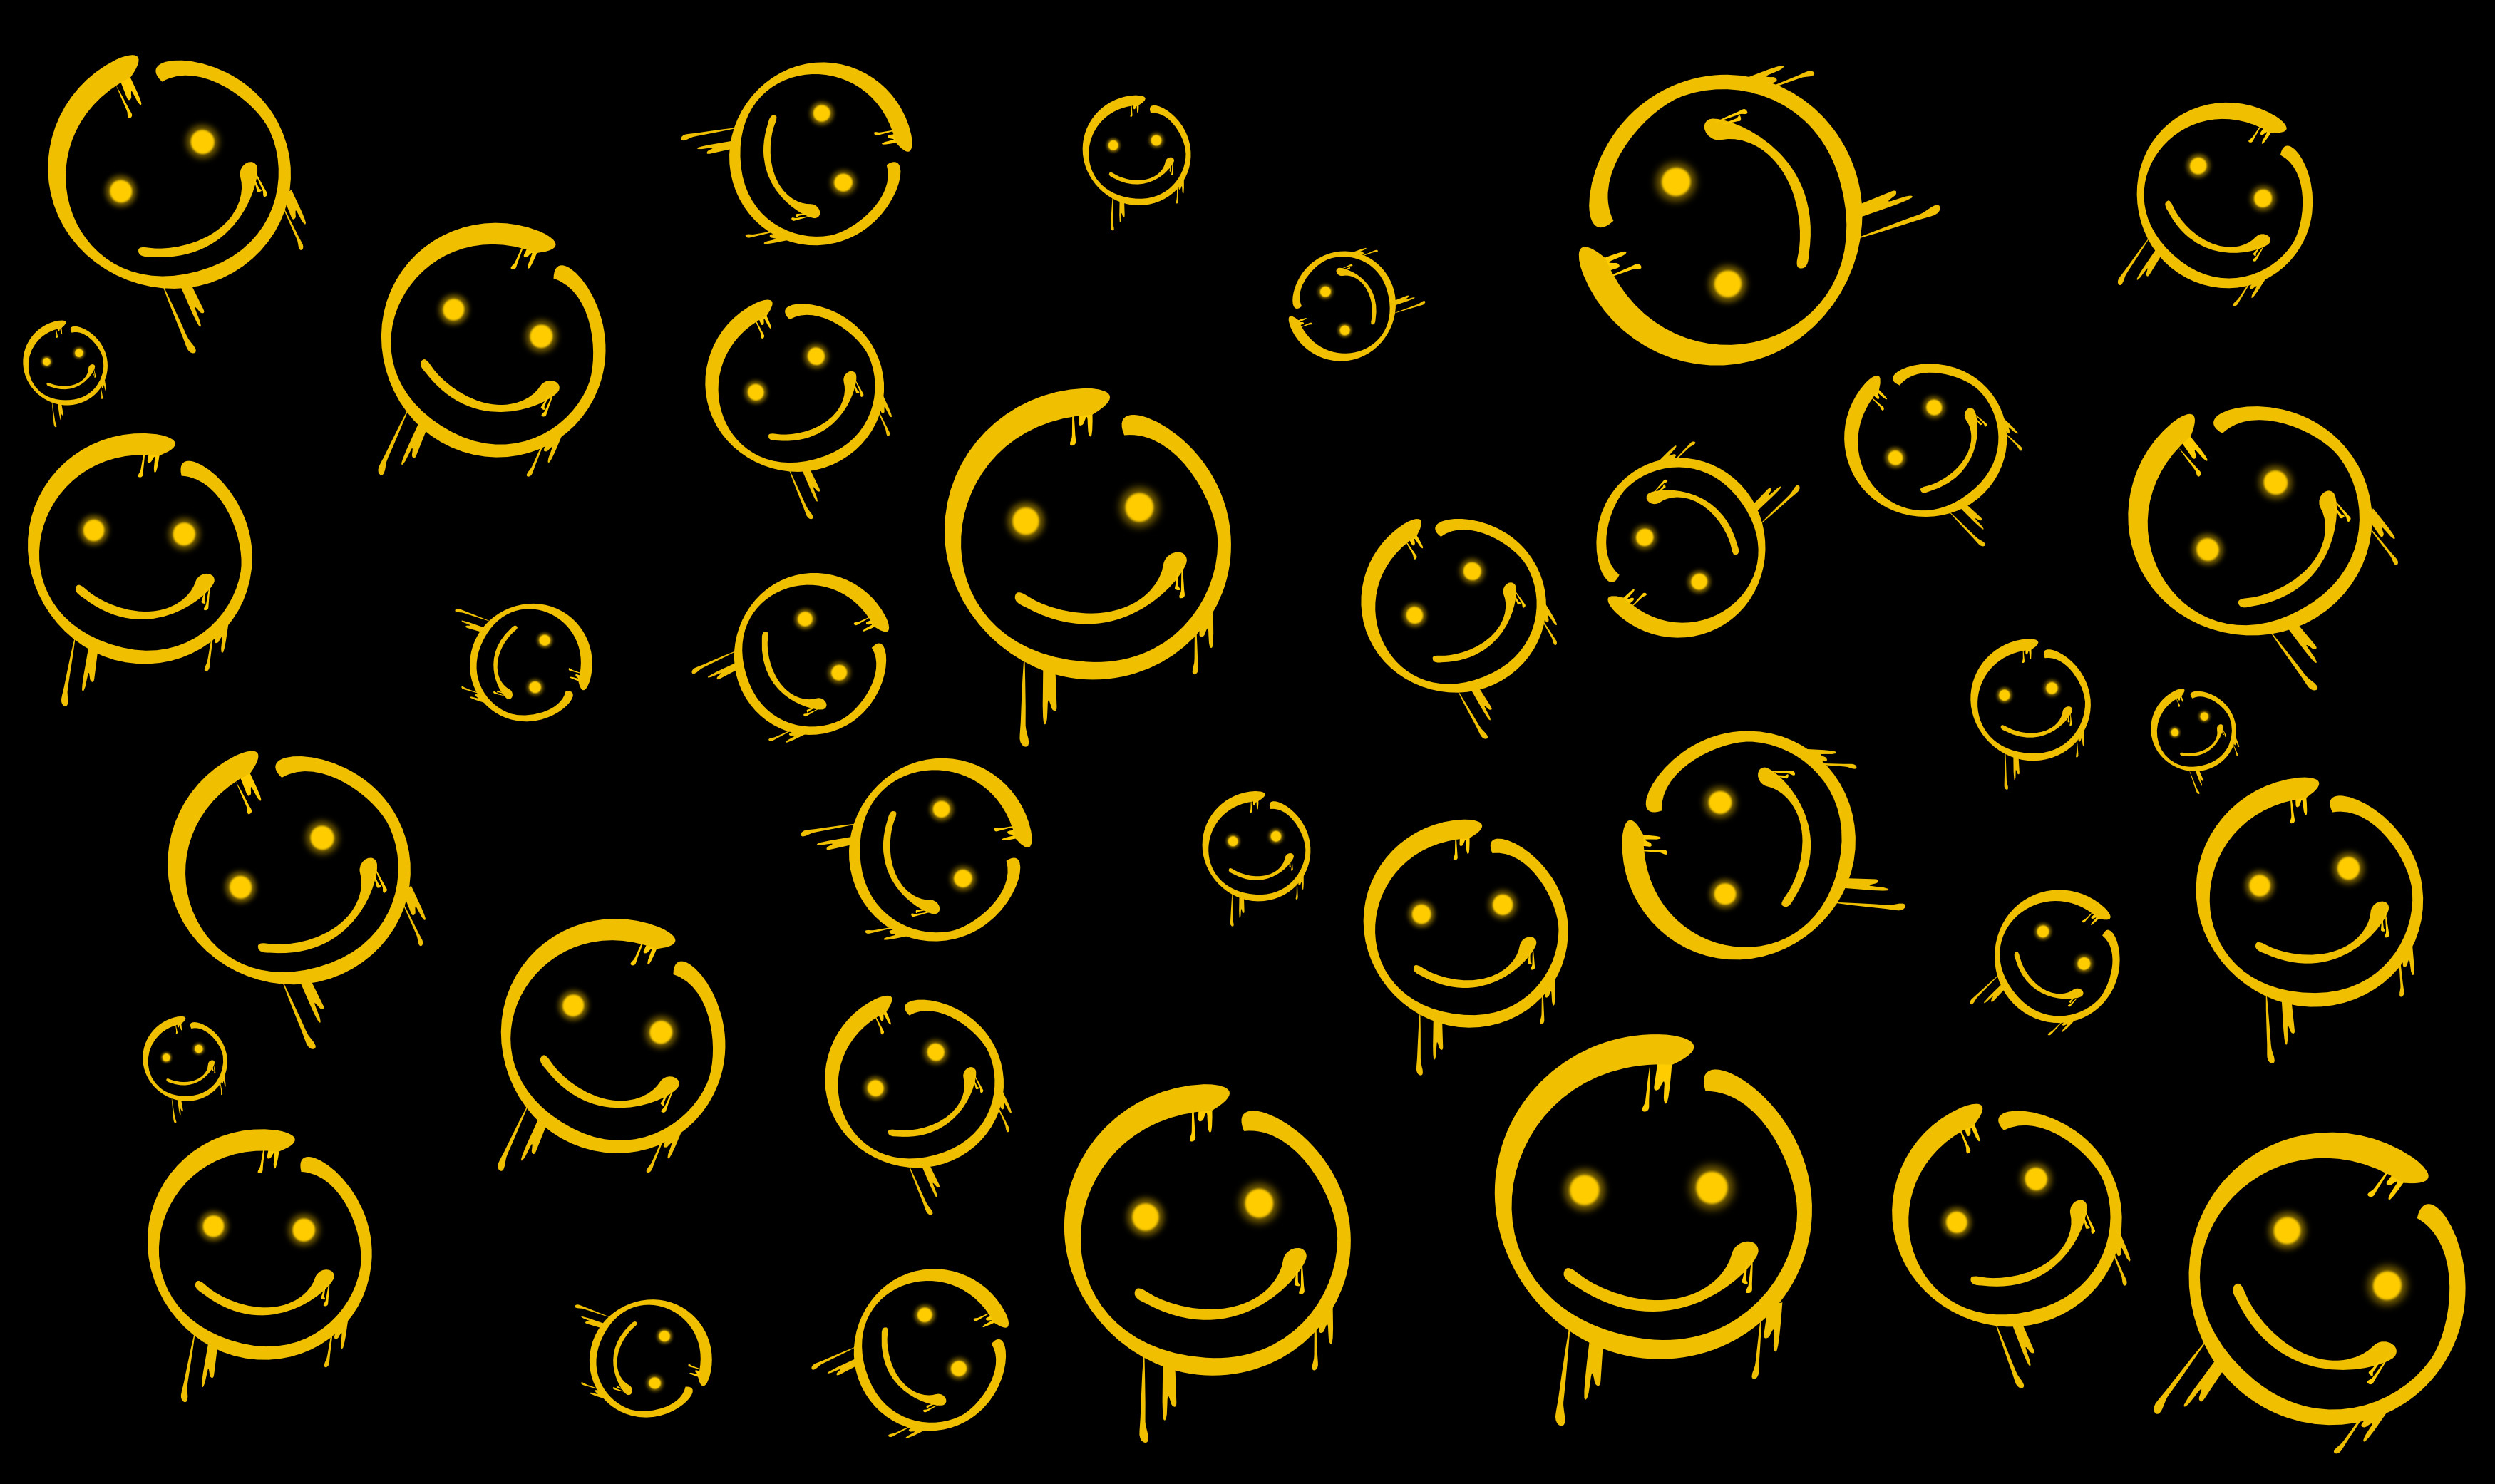 Mx74 Bored Adorable Desktop Wallpapers For Free - Trippy Smiley Face Background - HD Wallpaper 